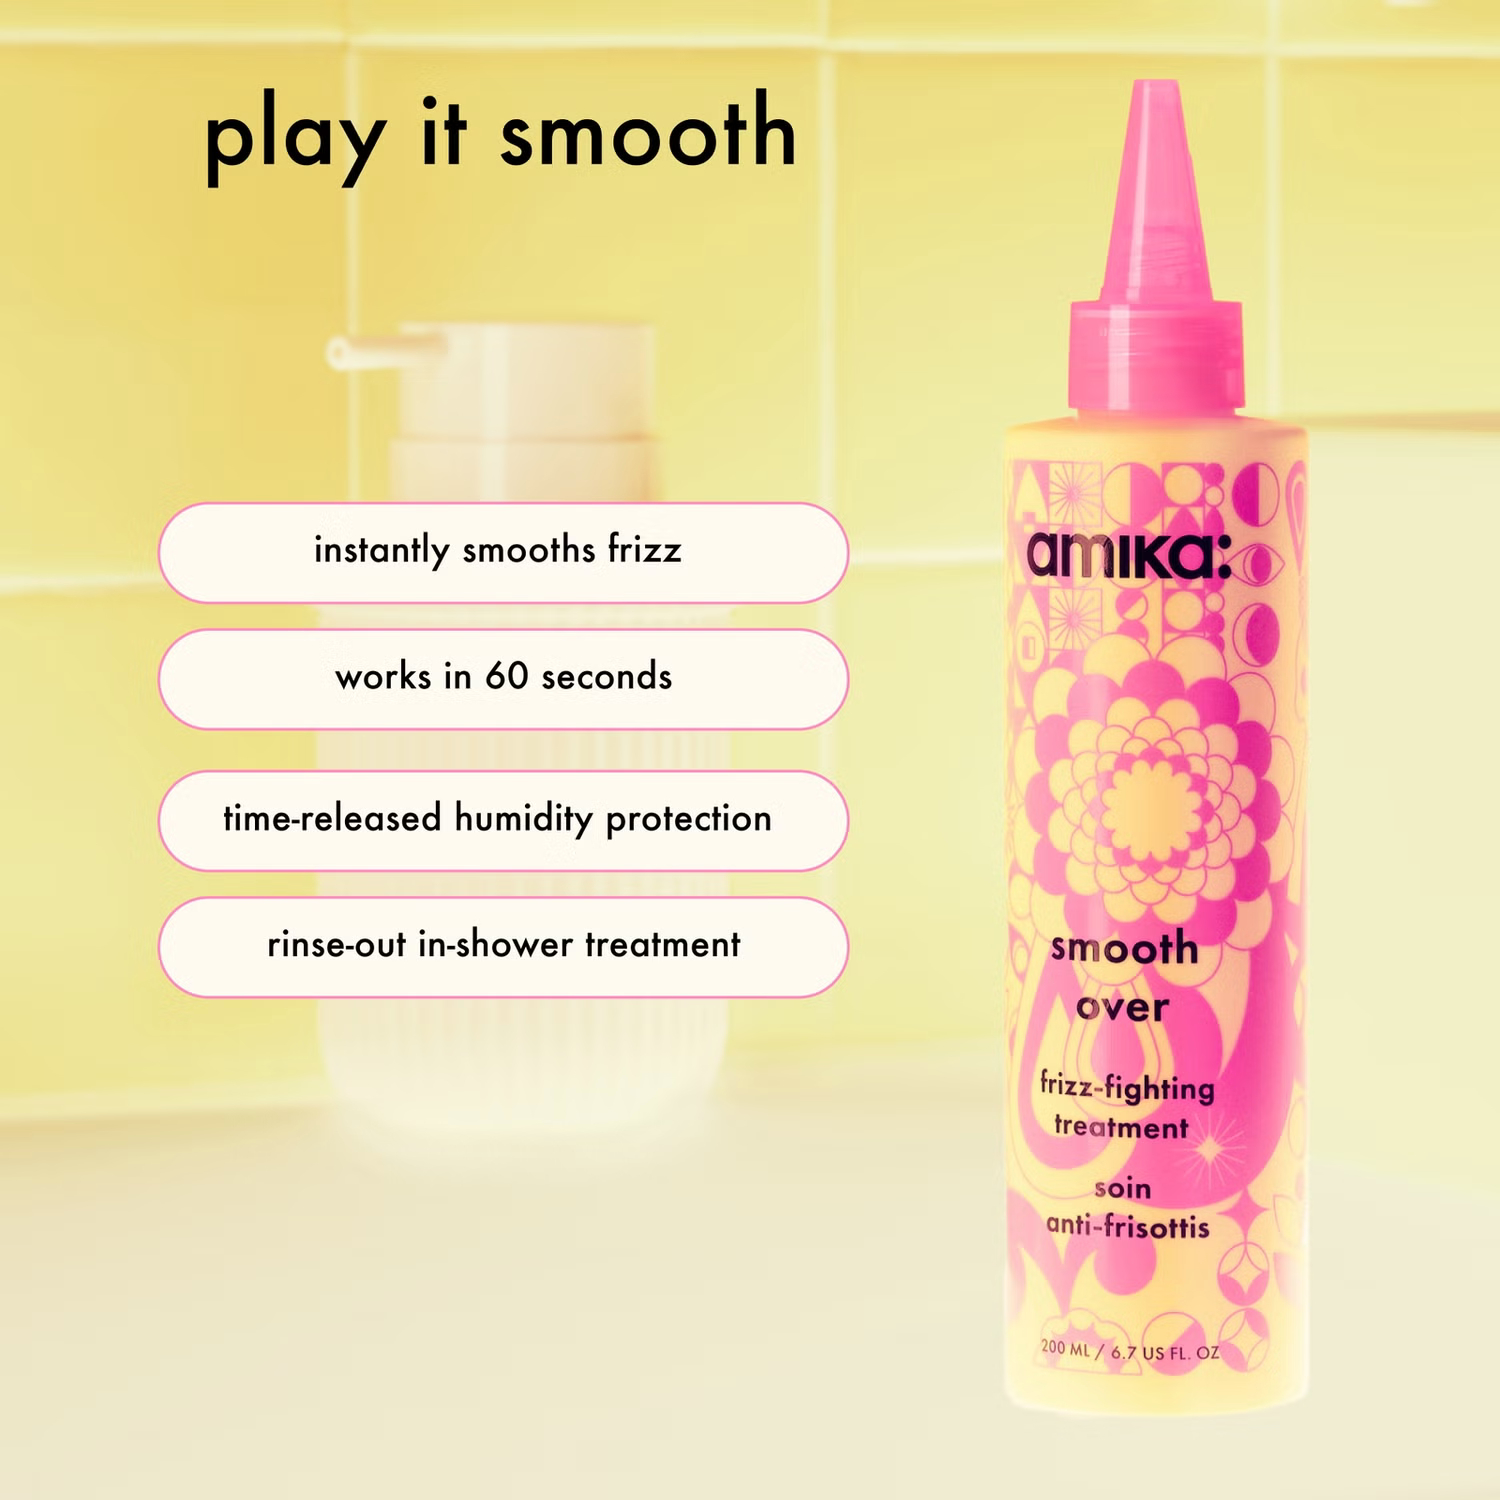 Amika Smooth Over Frizz-Fighting Treatment